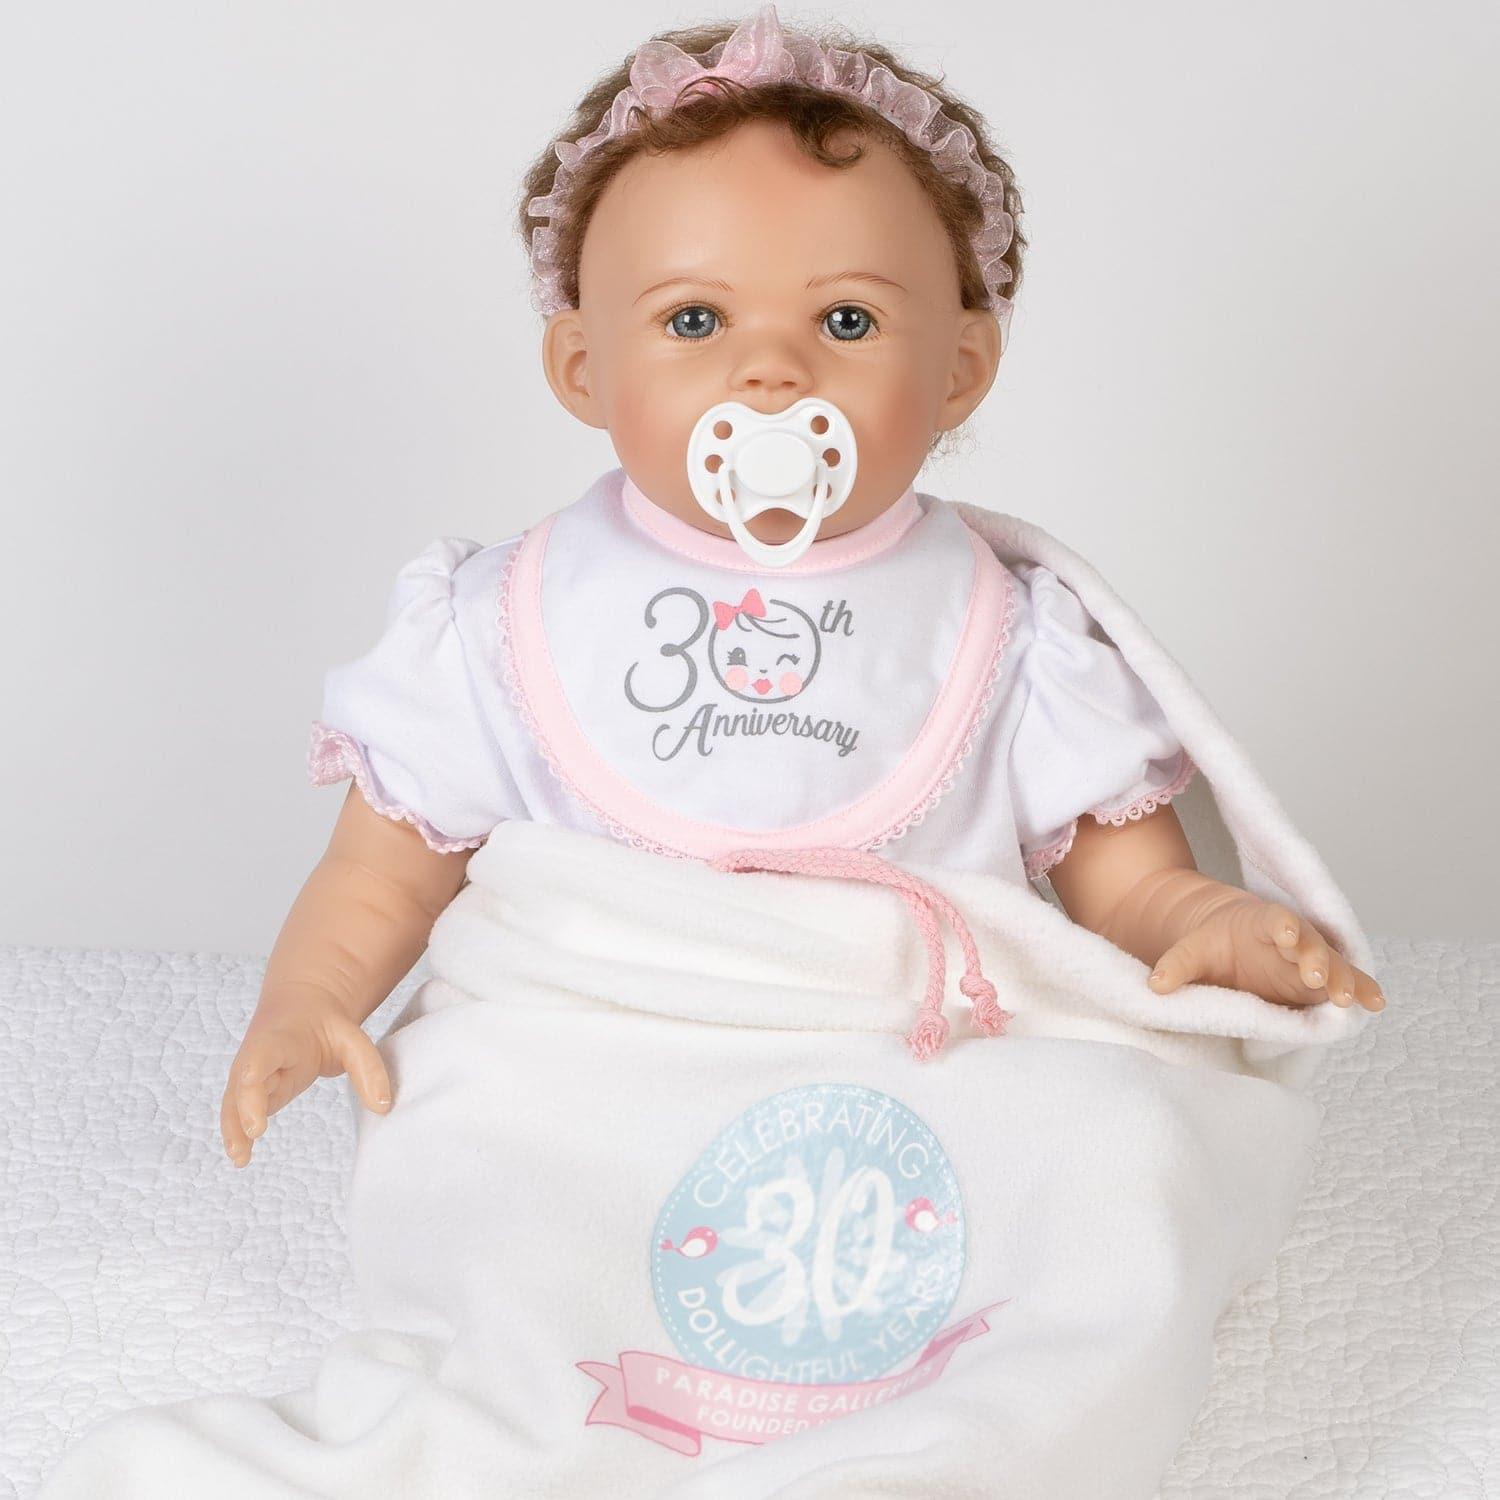 Paradise Galleries 30th Anniversary Toddler Doll, Little Love 21 inch 